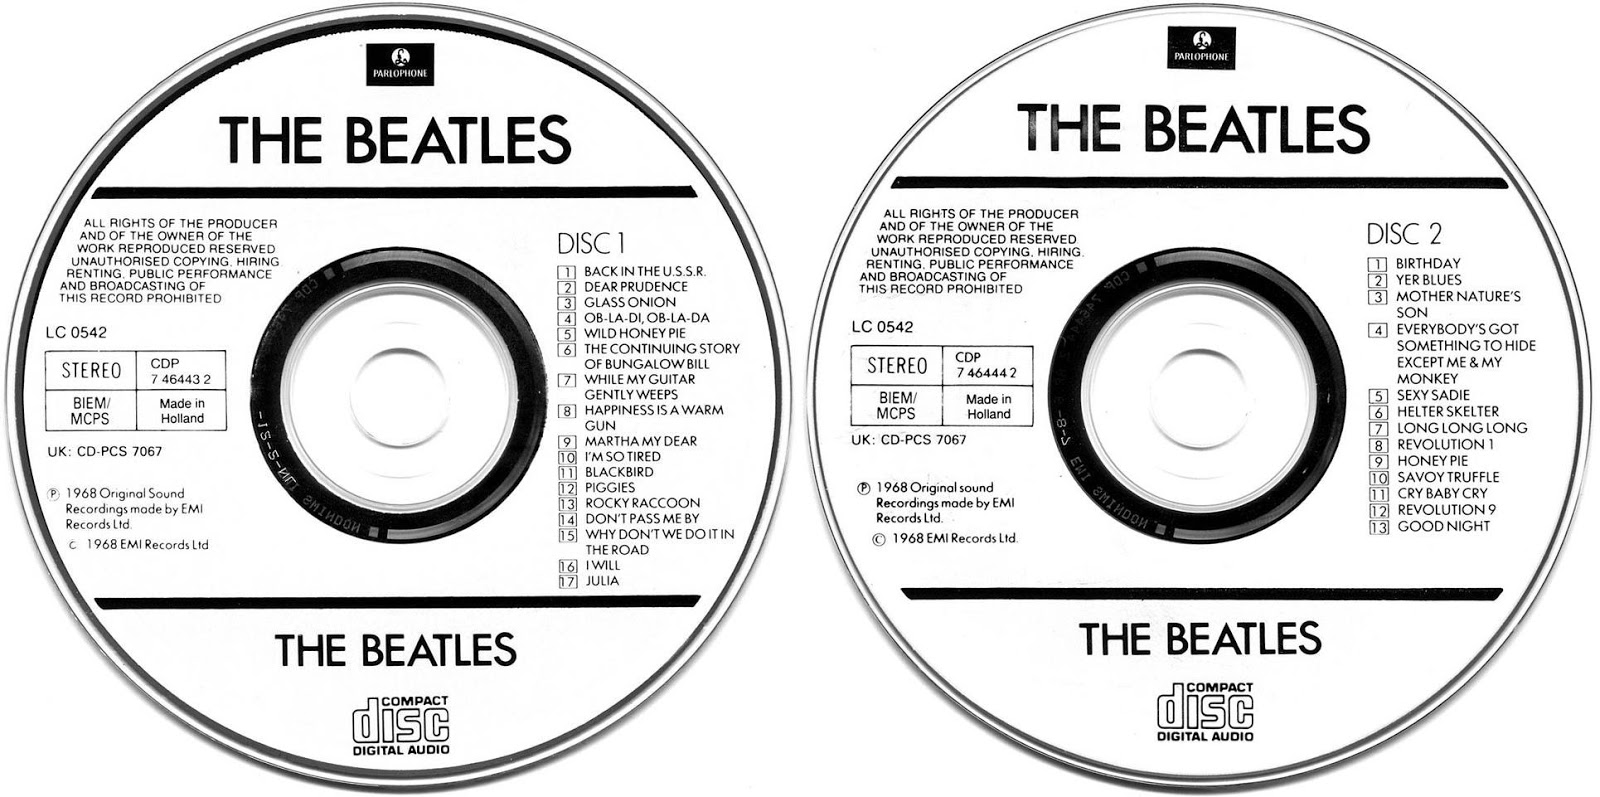 1987 Parlophone release of The Beatles on CD for the first time.